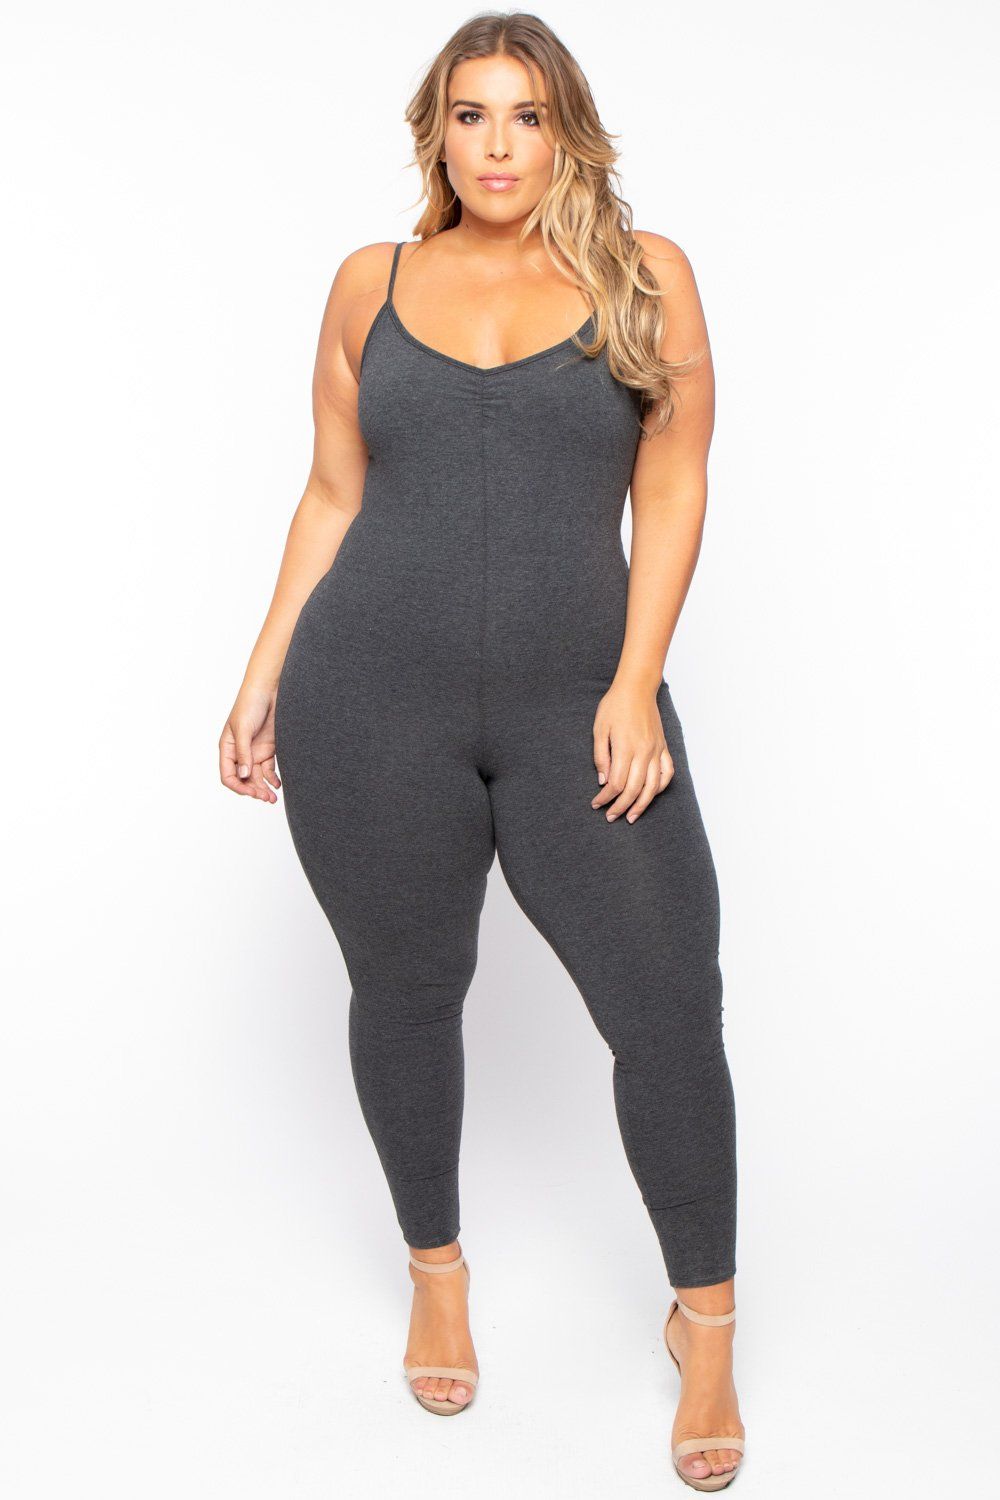 Plus Size Essential Catsuit - Charcoal - 4X / Charcoal